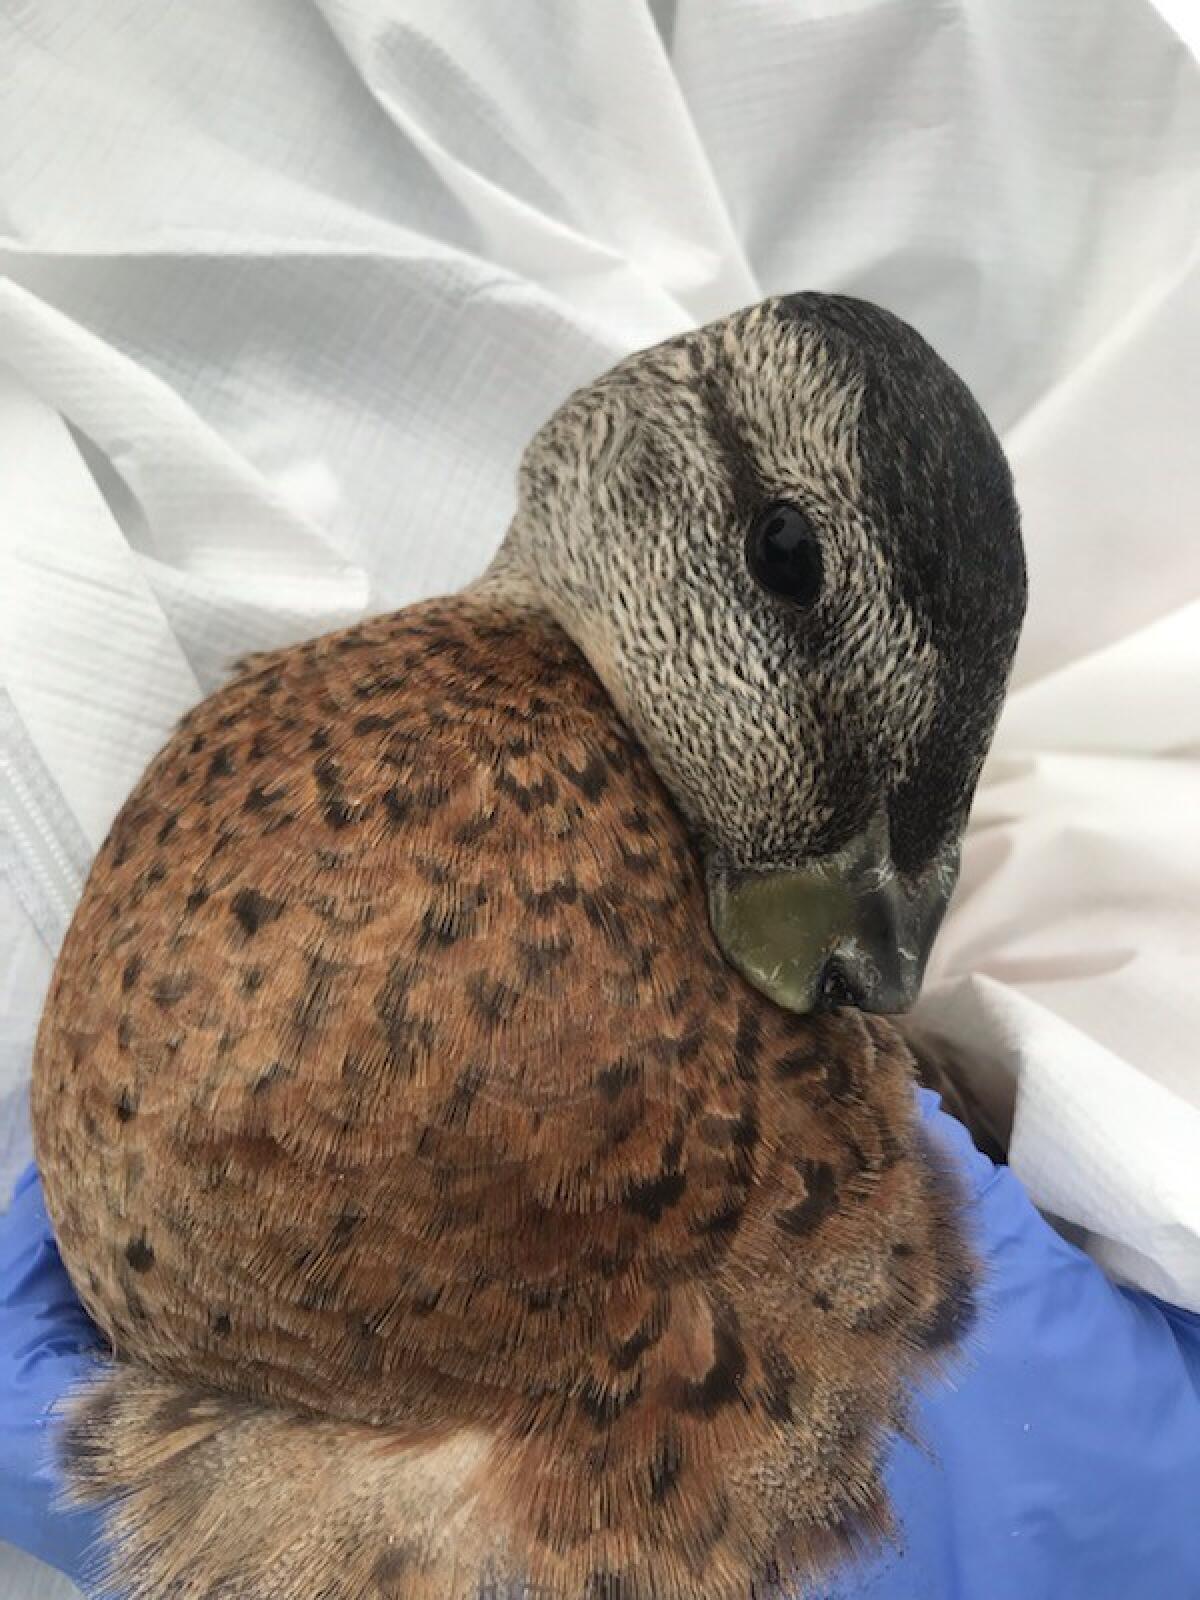 A mallard was one of three ducks recently discovered with their bills cut or broken off. All three died or were euthanized.